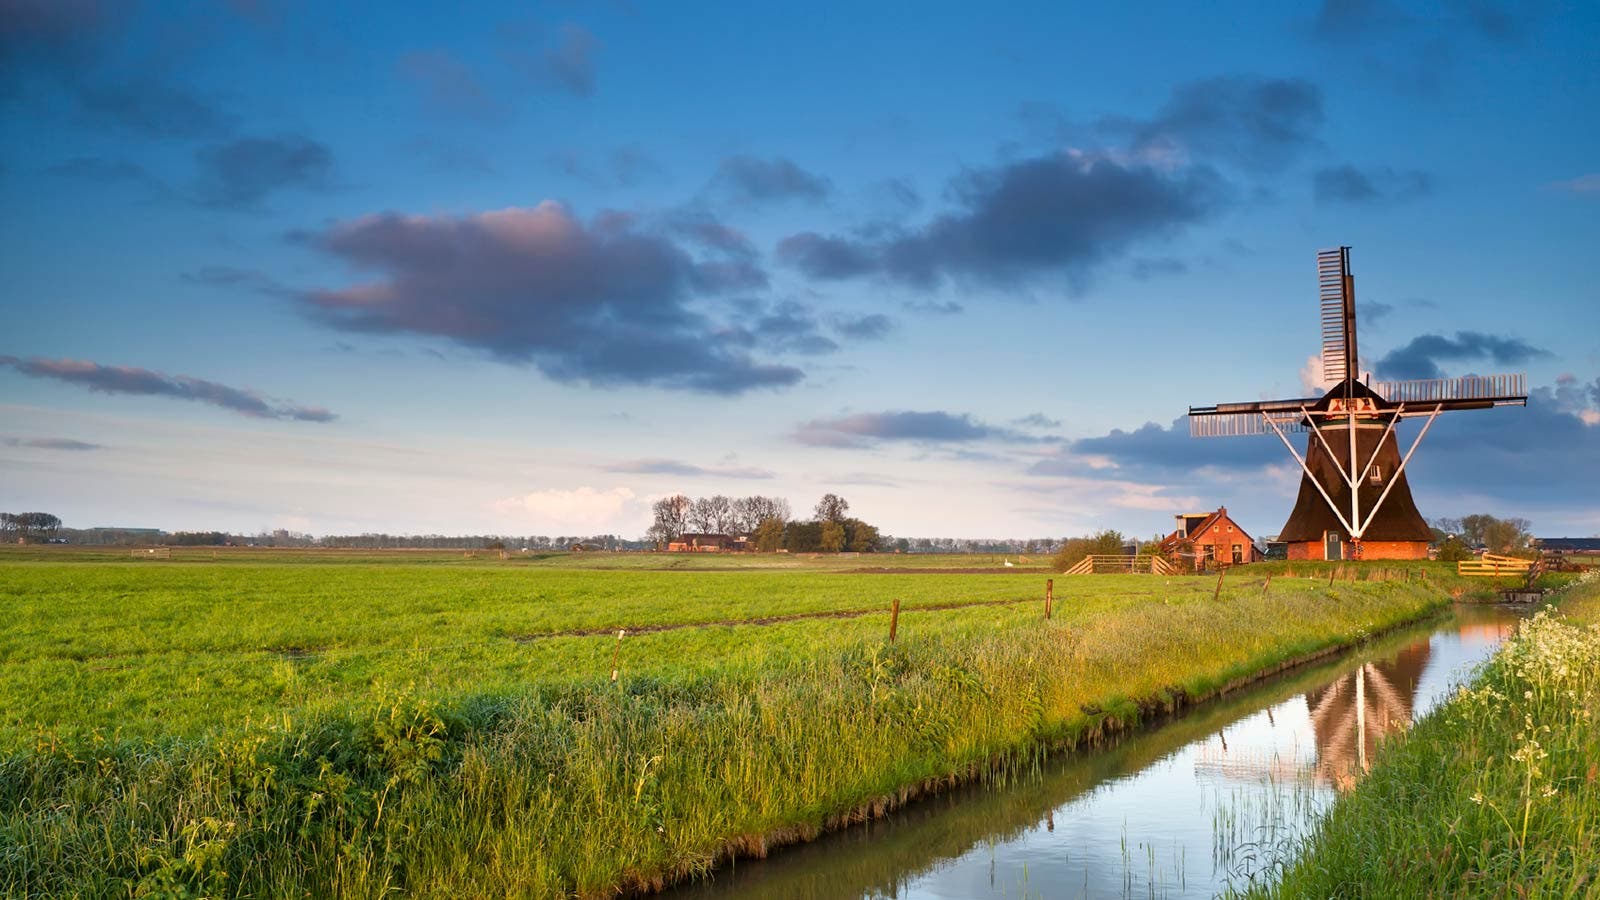 Many windmills in Holland have been preserved for visitors